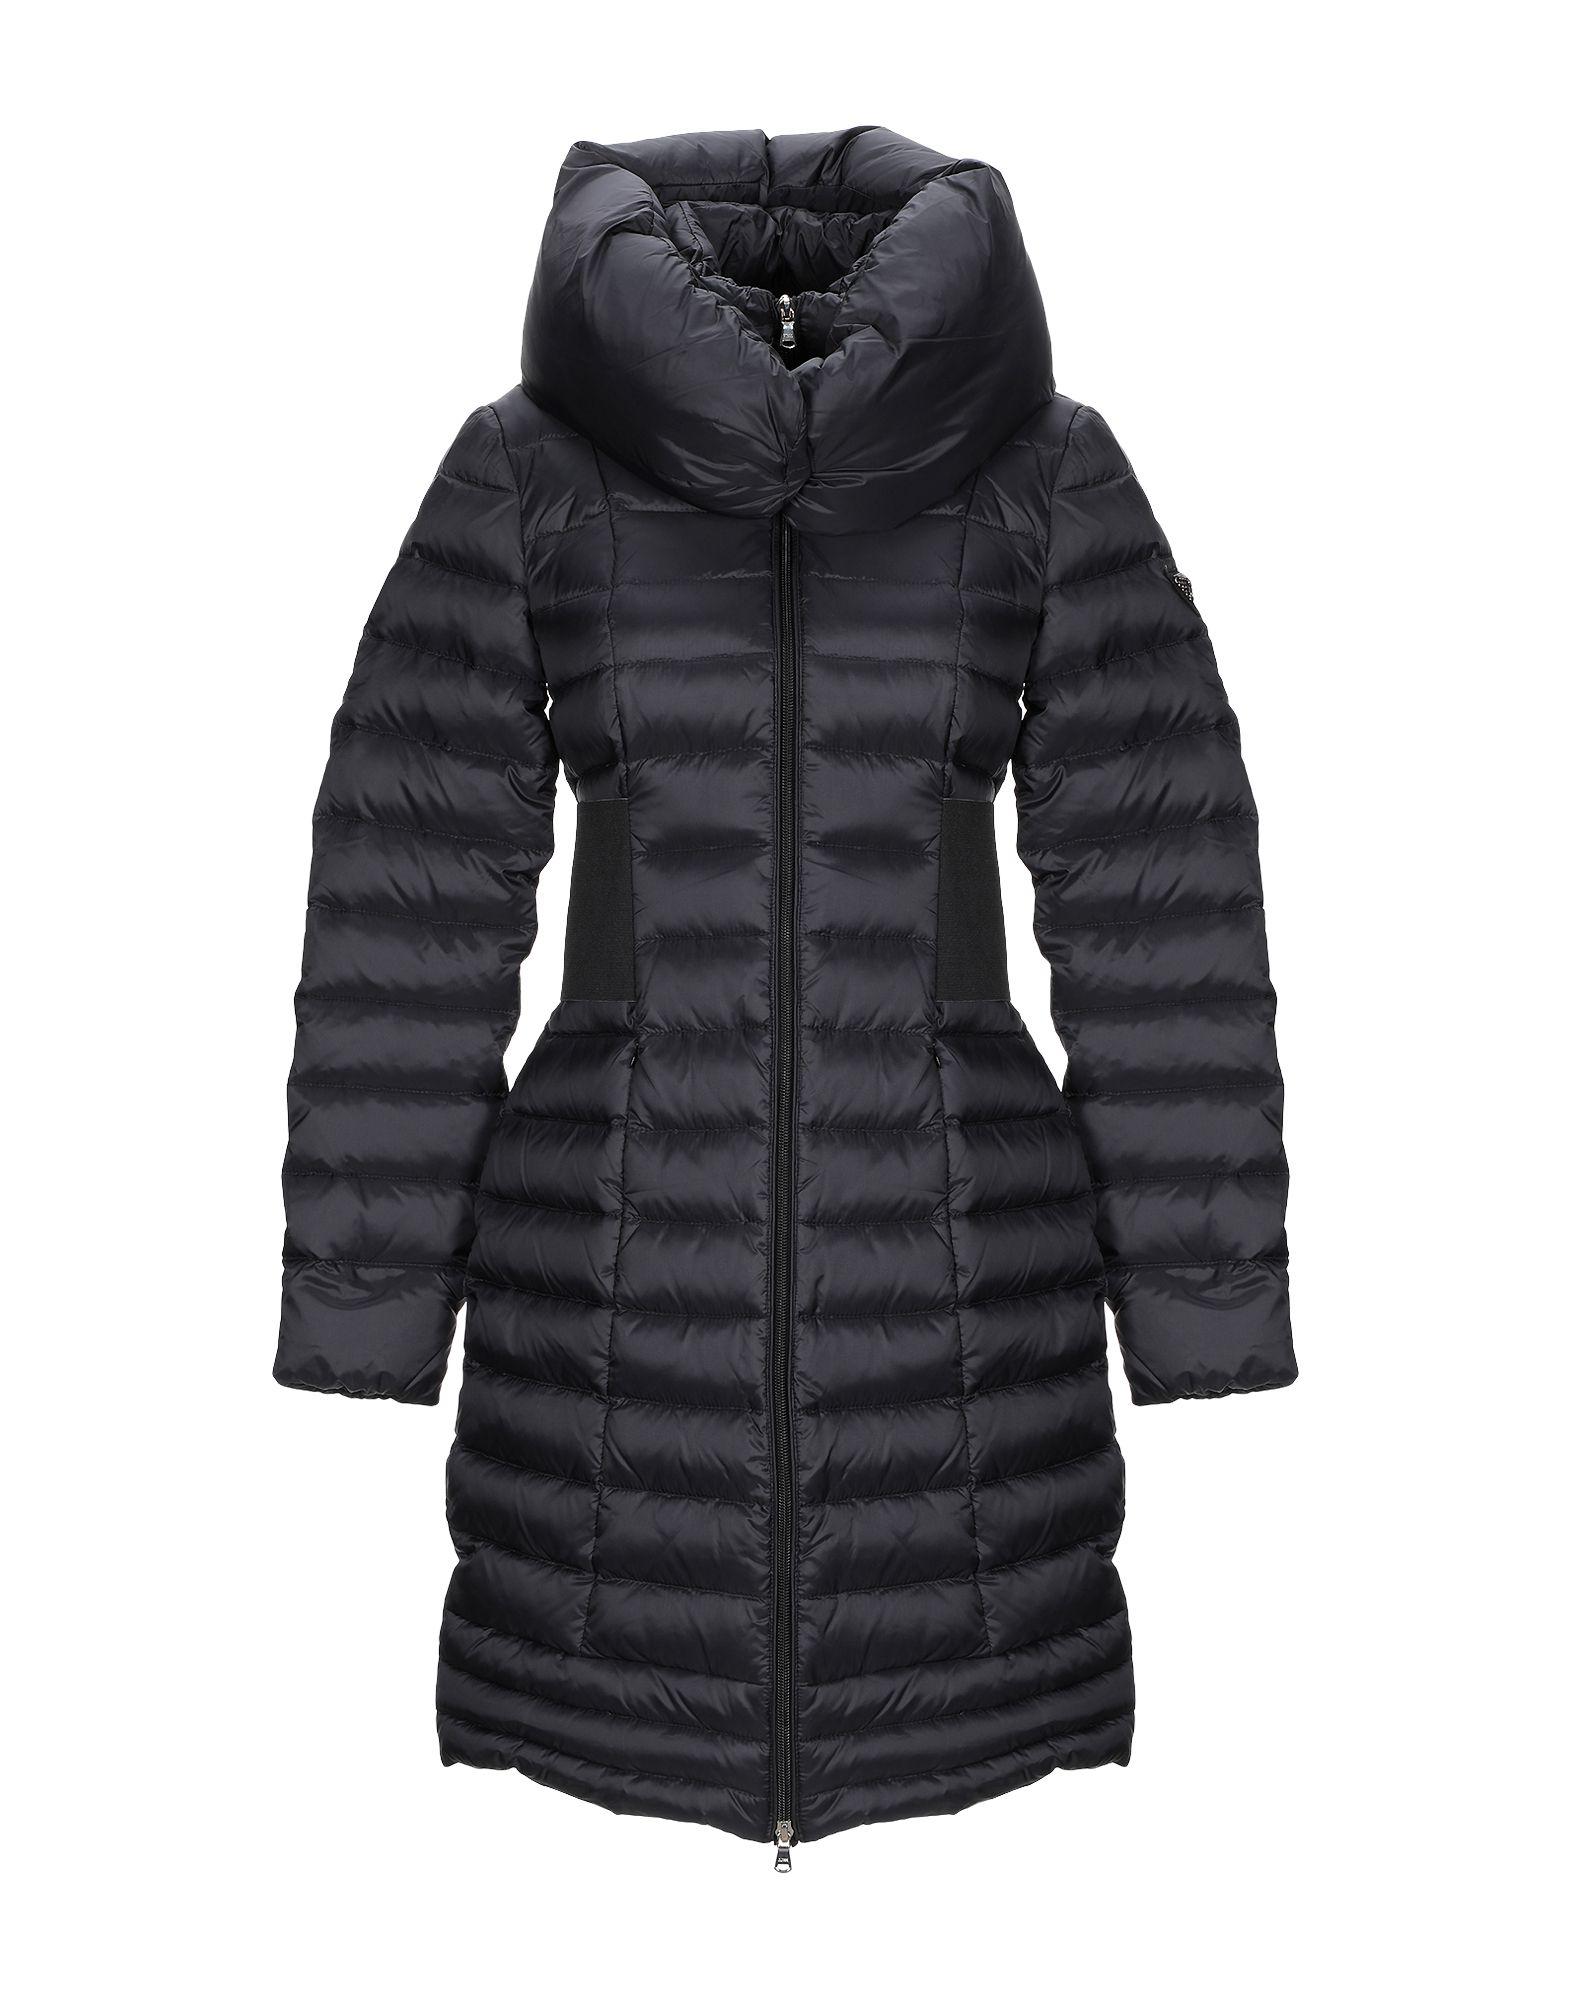 Guess Synthetic Down Jacket in Black - Lyst